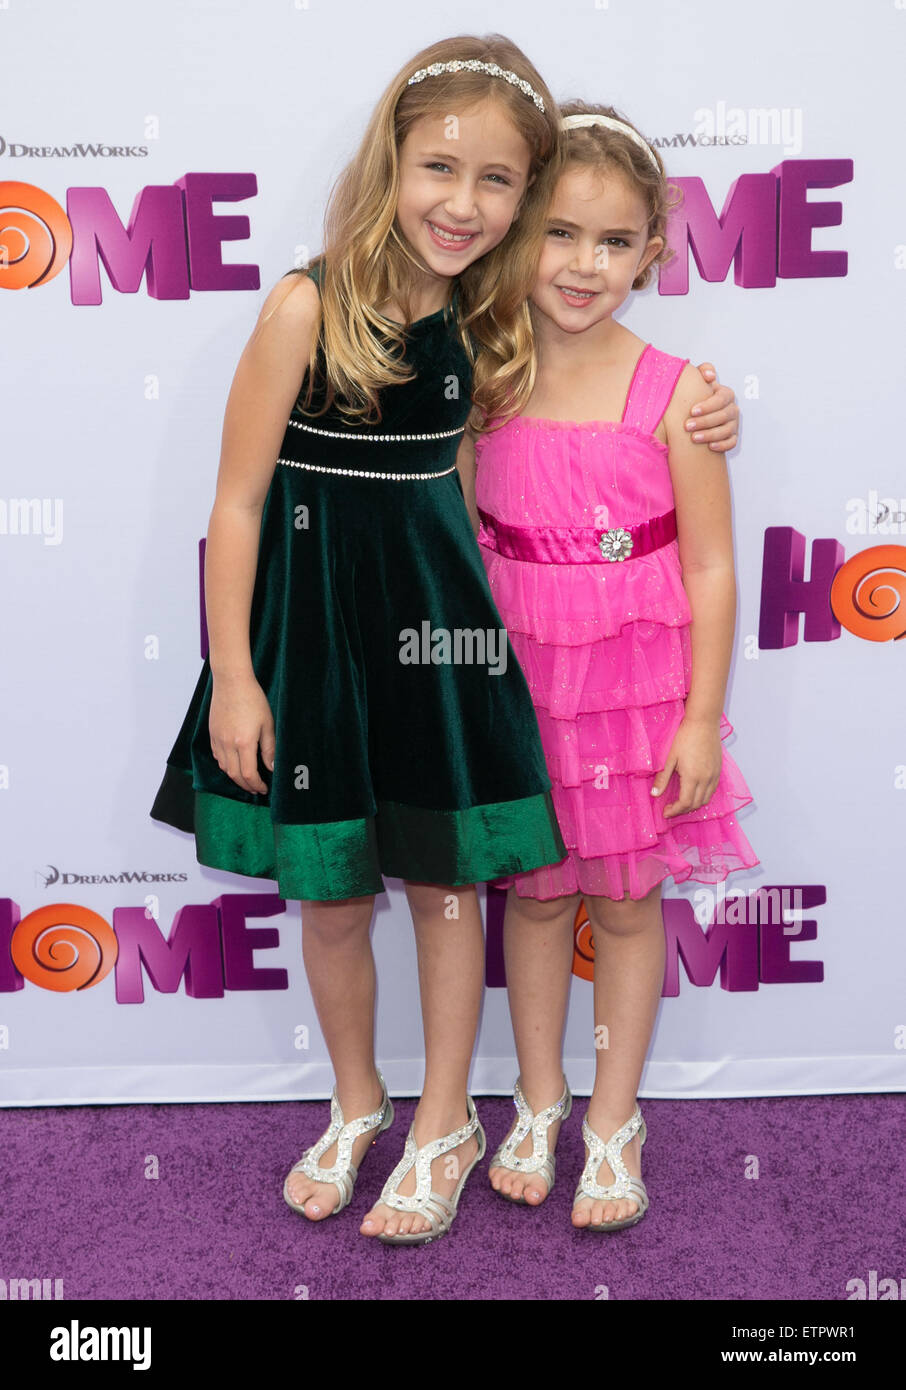 Celebrities attend HOME Special Screening presented by Twentieth Century Fox and Dreamworks Animation at Regency Village Theater in Westwood.  Featuring: Ava Kolker, Guest Where: Los Angeles, California, United States When: 22 Mar 2015 Credit: Brian To/WENN.com Stock Photo